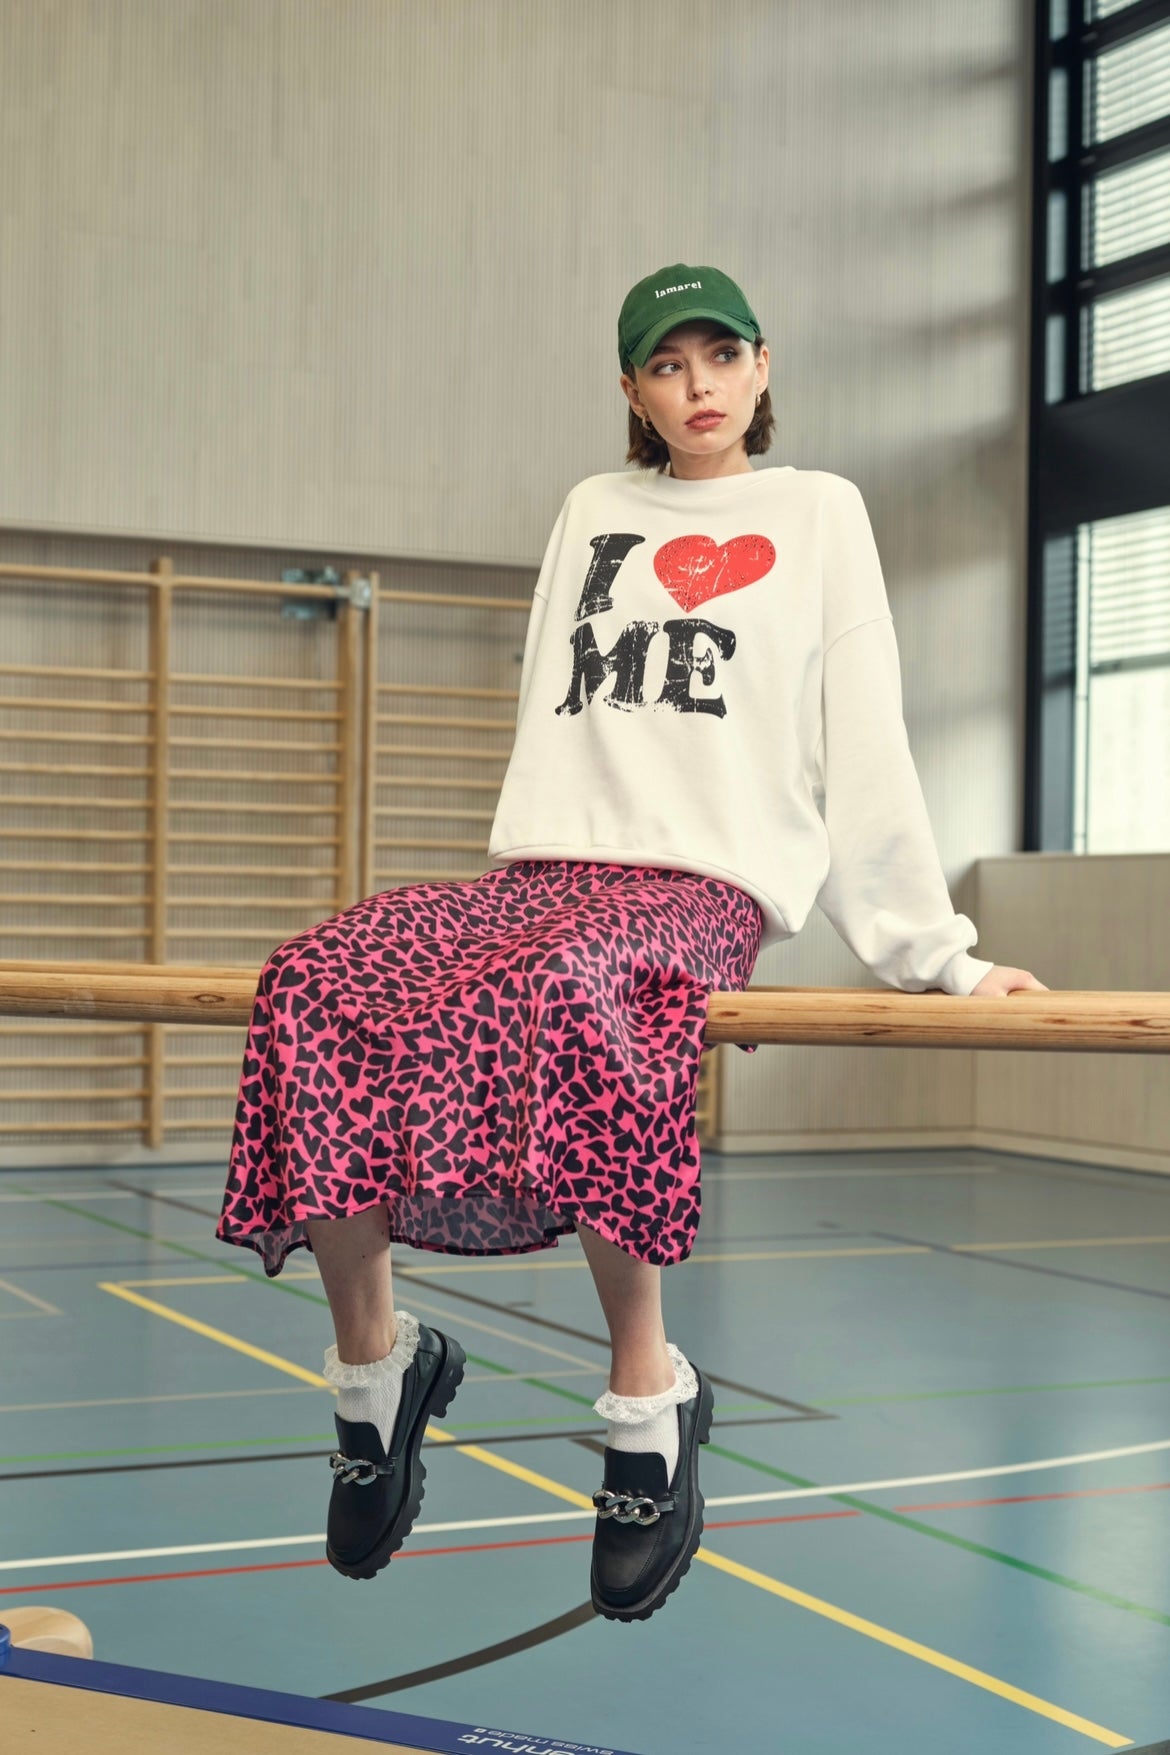 Frogbox "I Love Me" Pullover